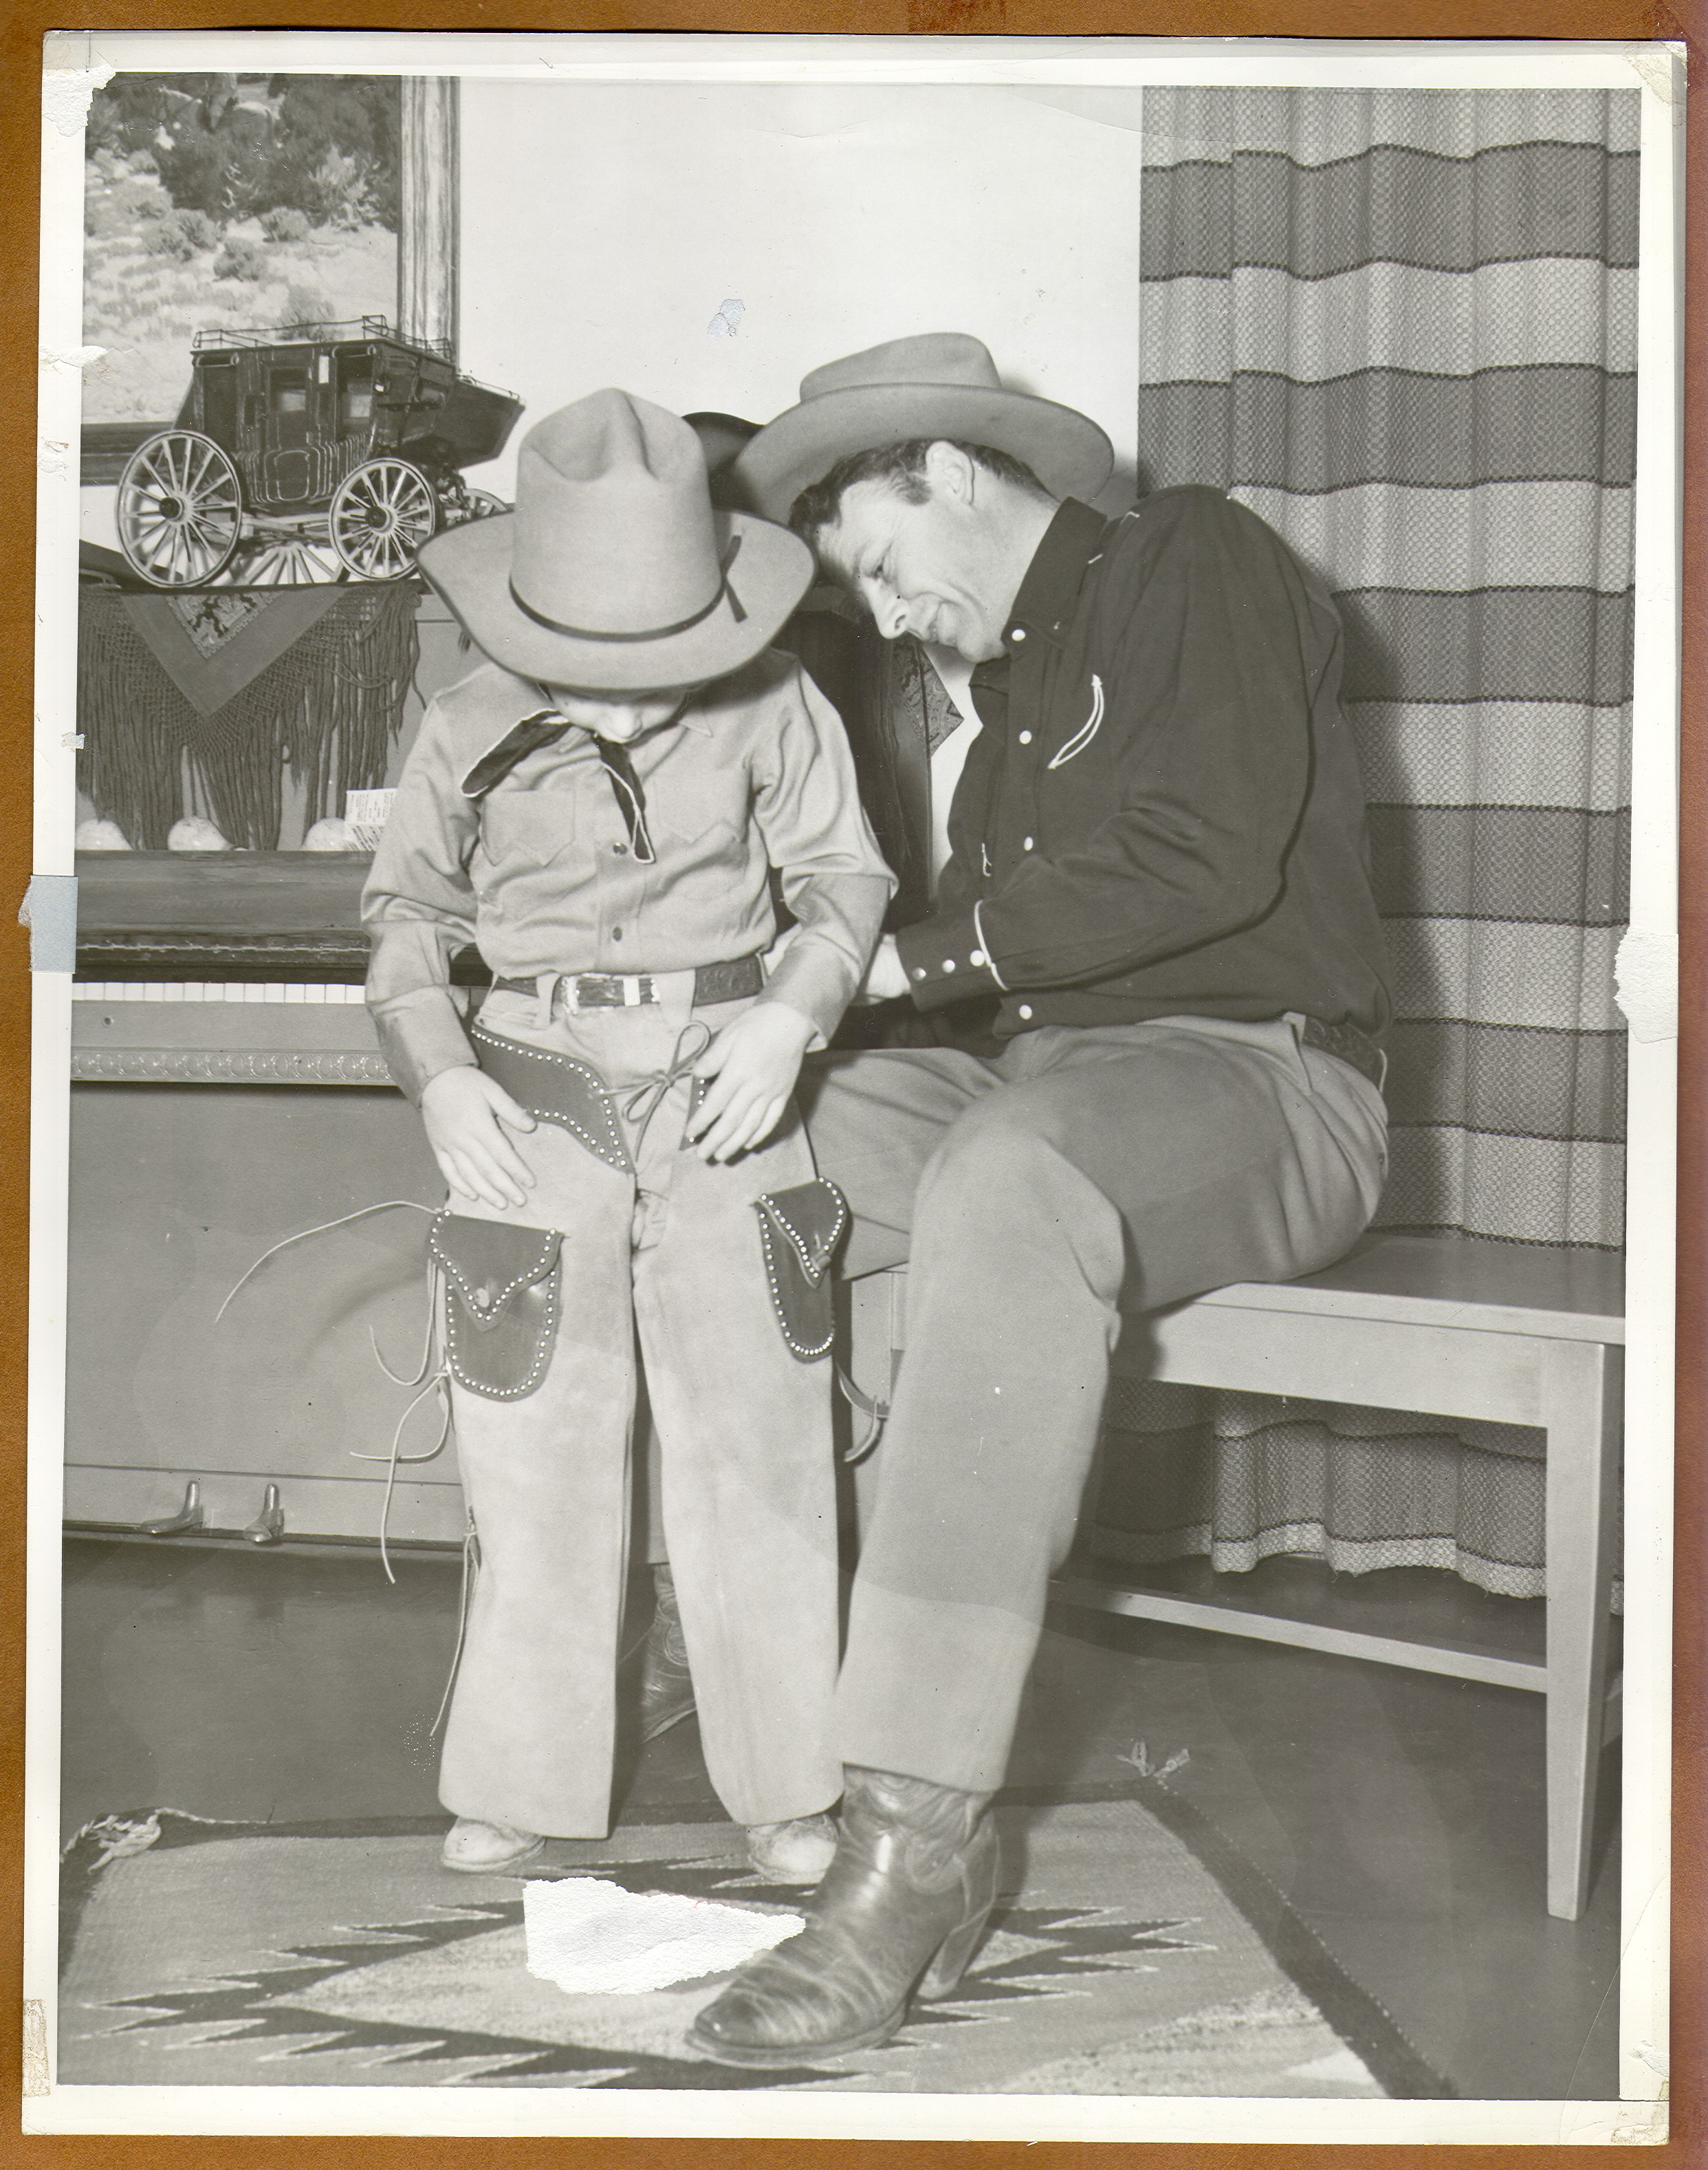 Rex Bell helping his son Rex Bell Jr. put on his cowboy gear: photographic print